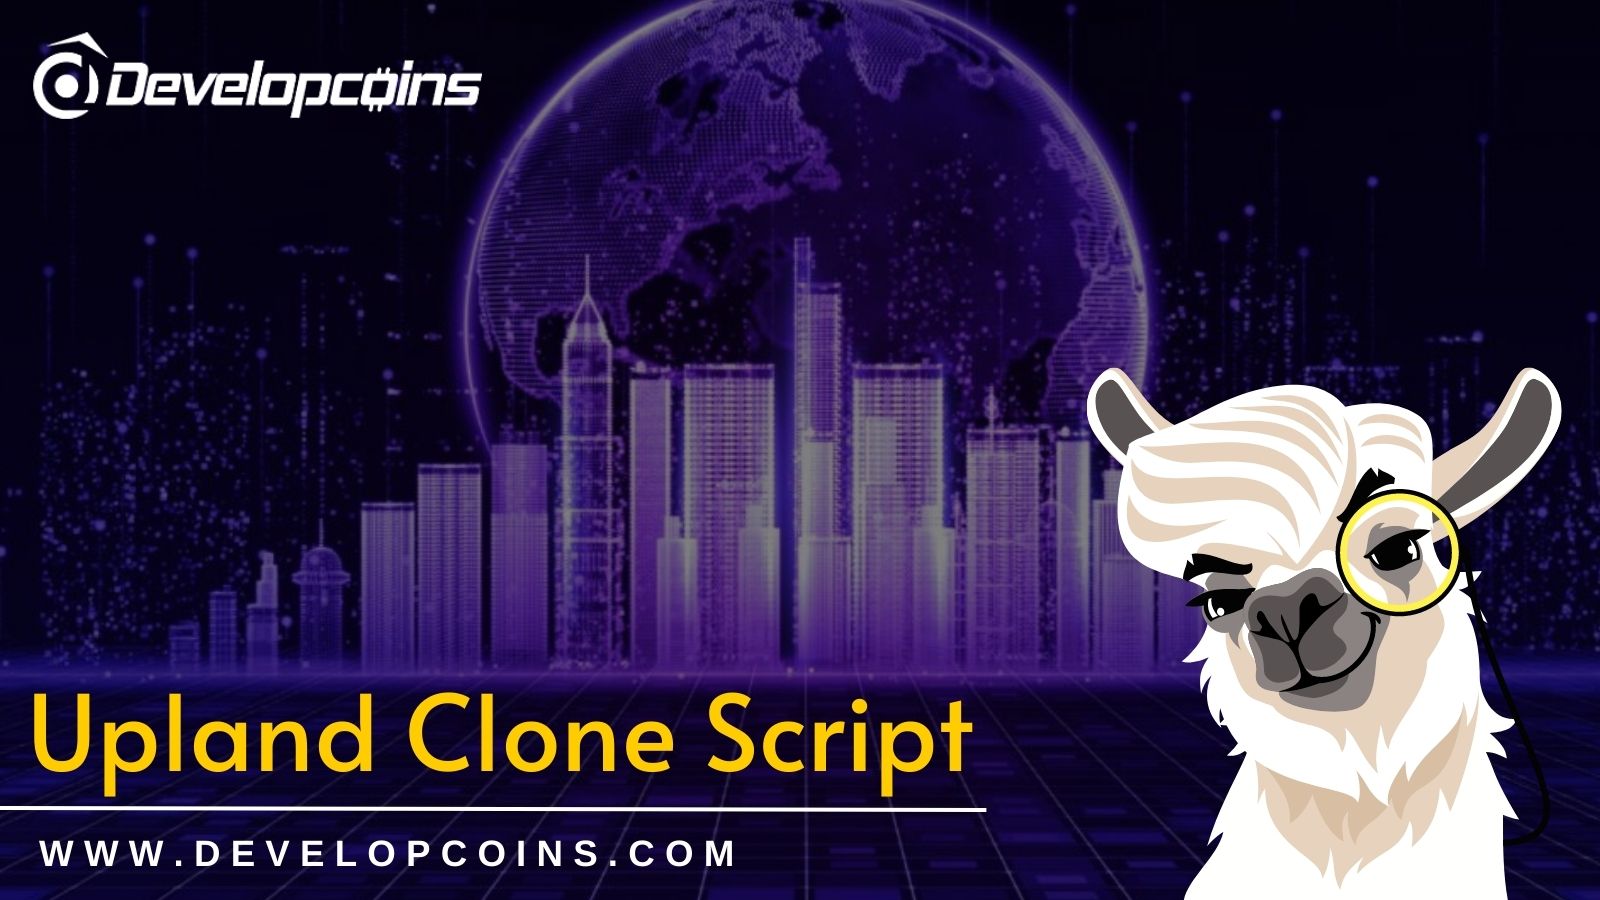 Upland Clone Script - The key To Successfully Launch Your Own Virtual Property Game